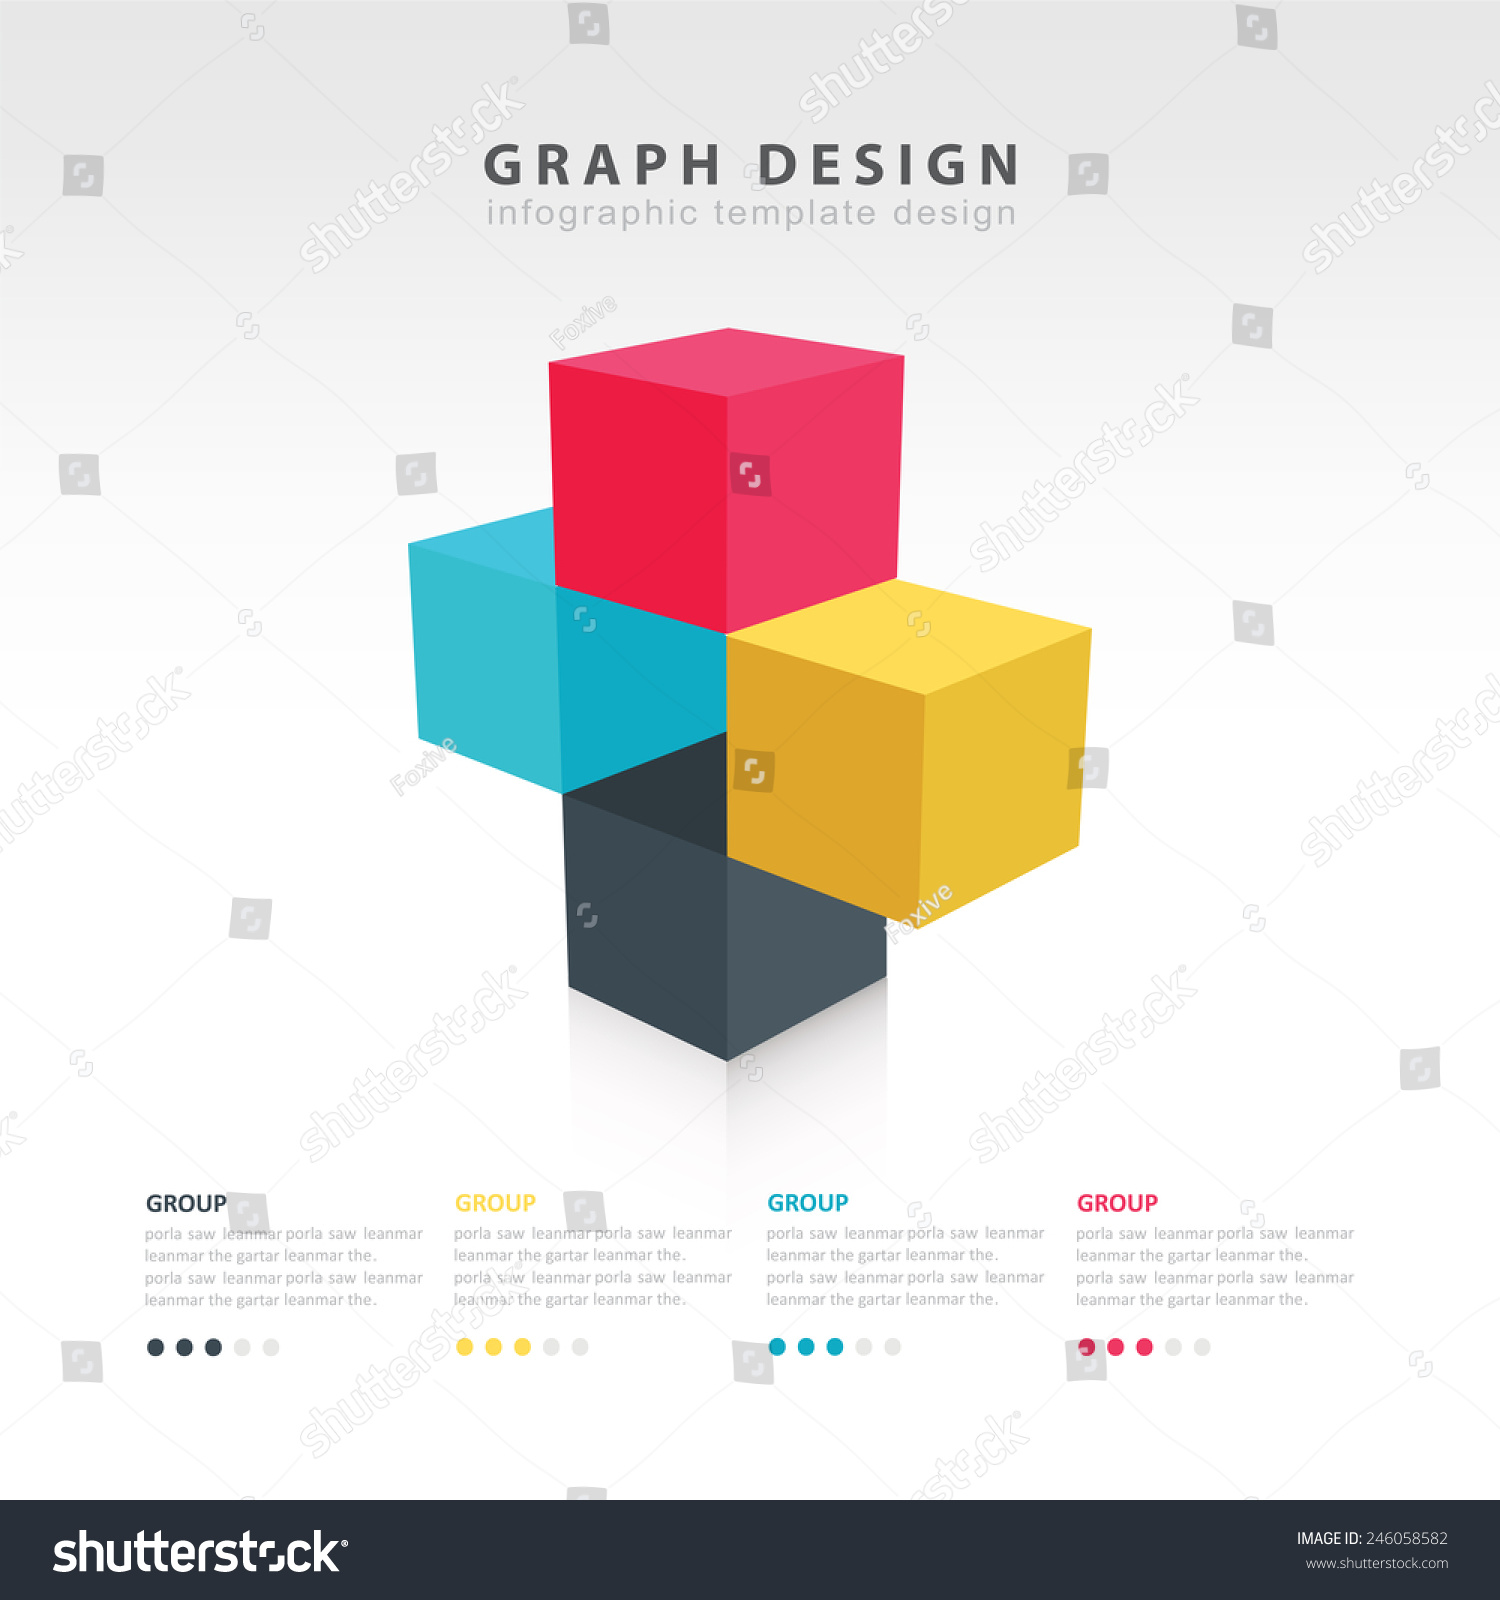 3d Cube Graph Info Graphic Design Stock Vector Royalty Free